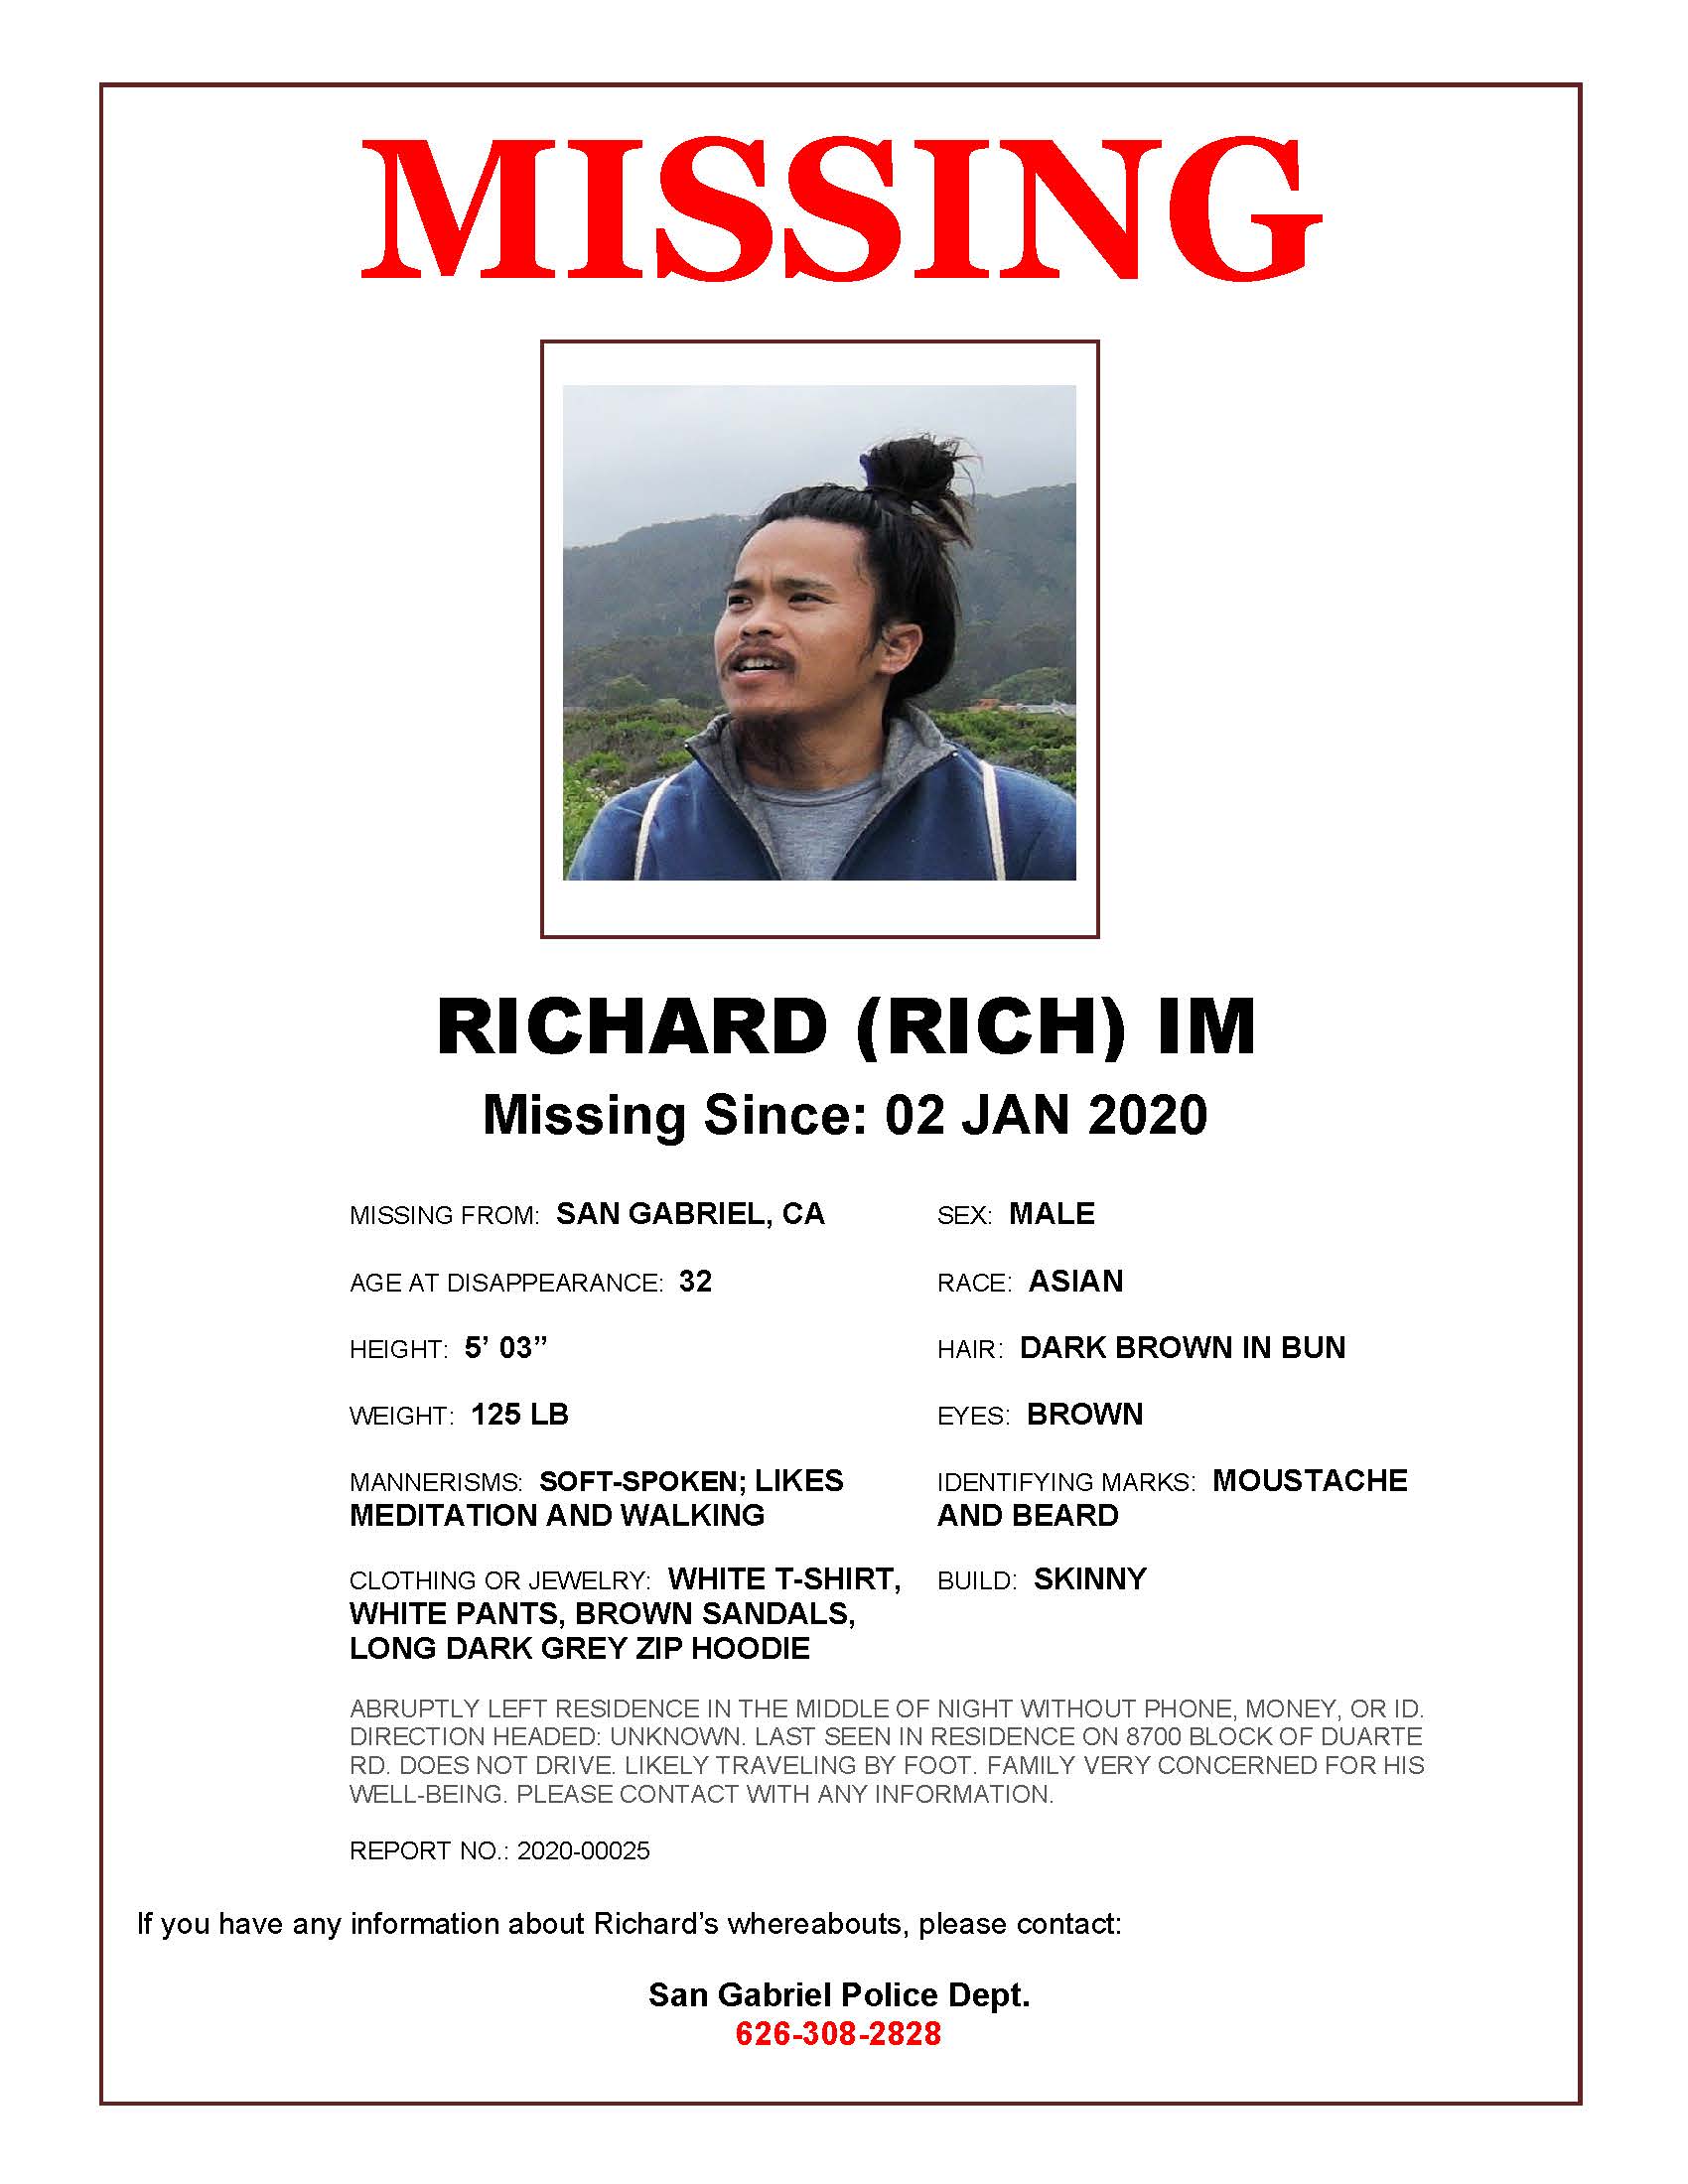 Missing Persons Case, Los Angeles area Richard Im 8Asians An Asian